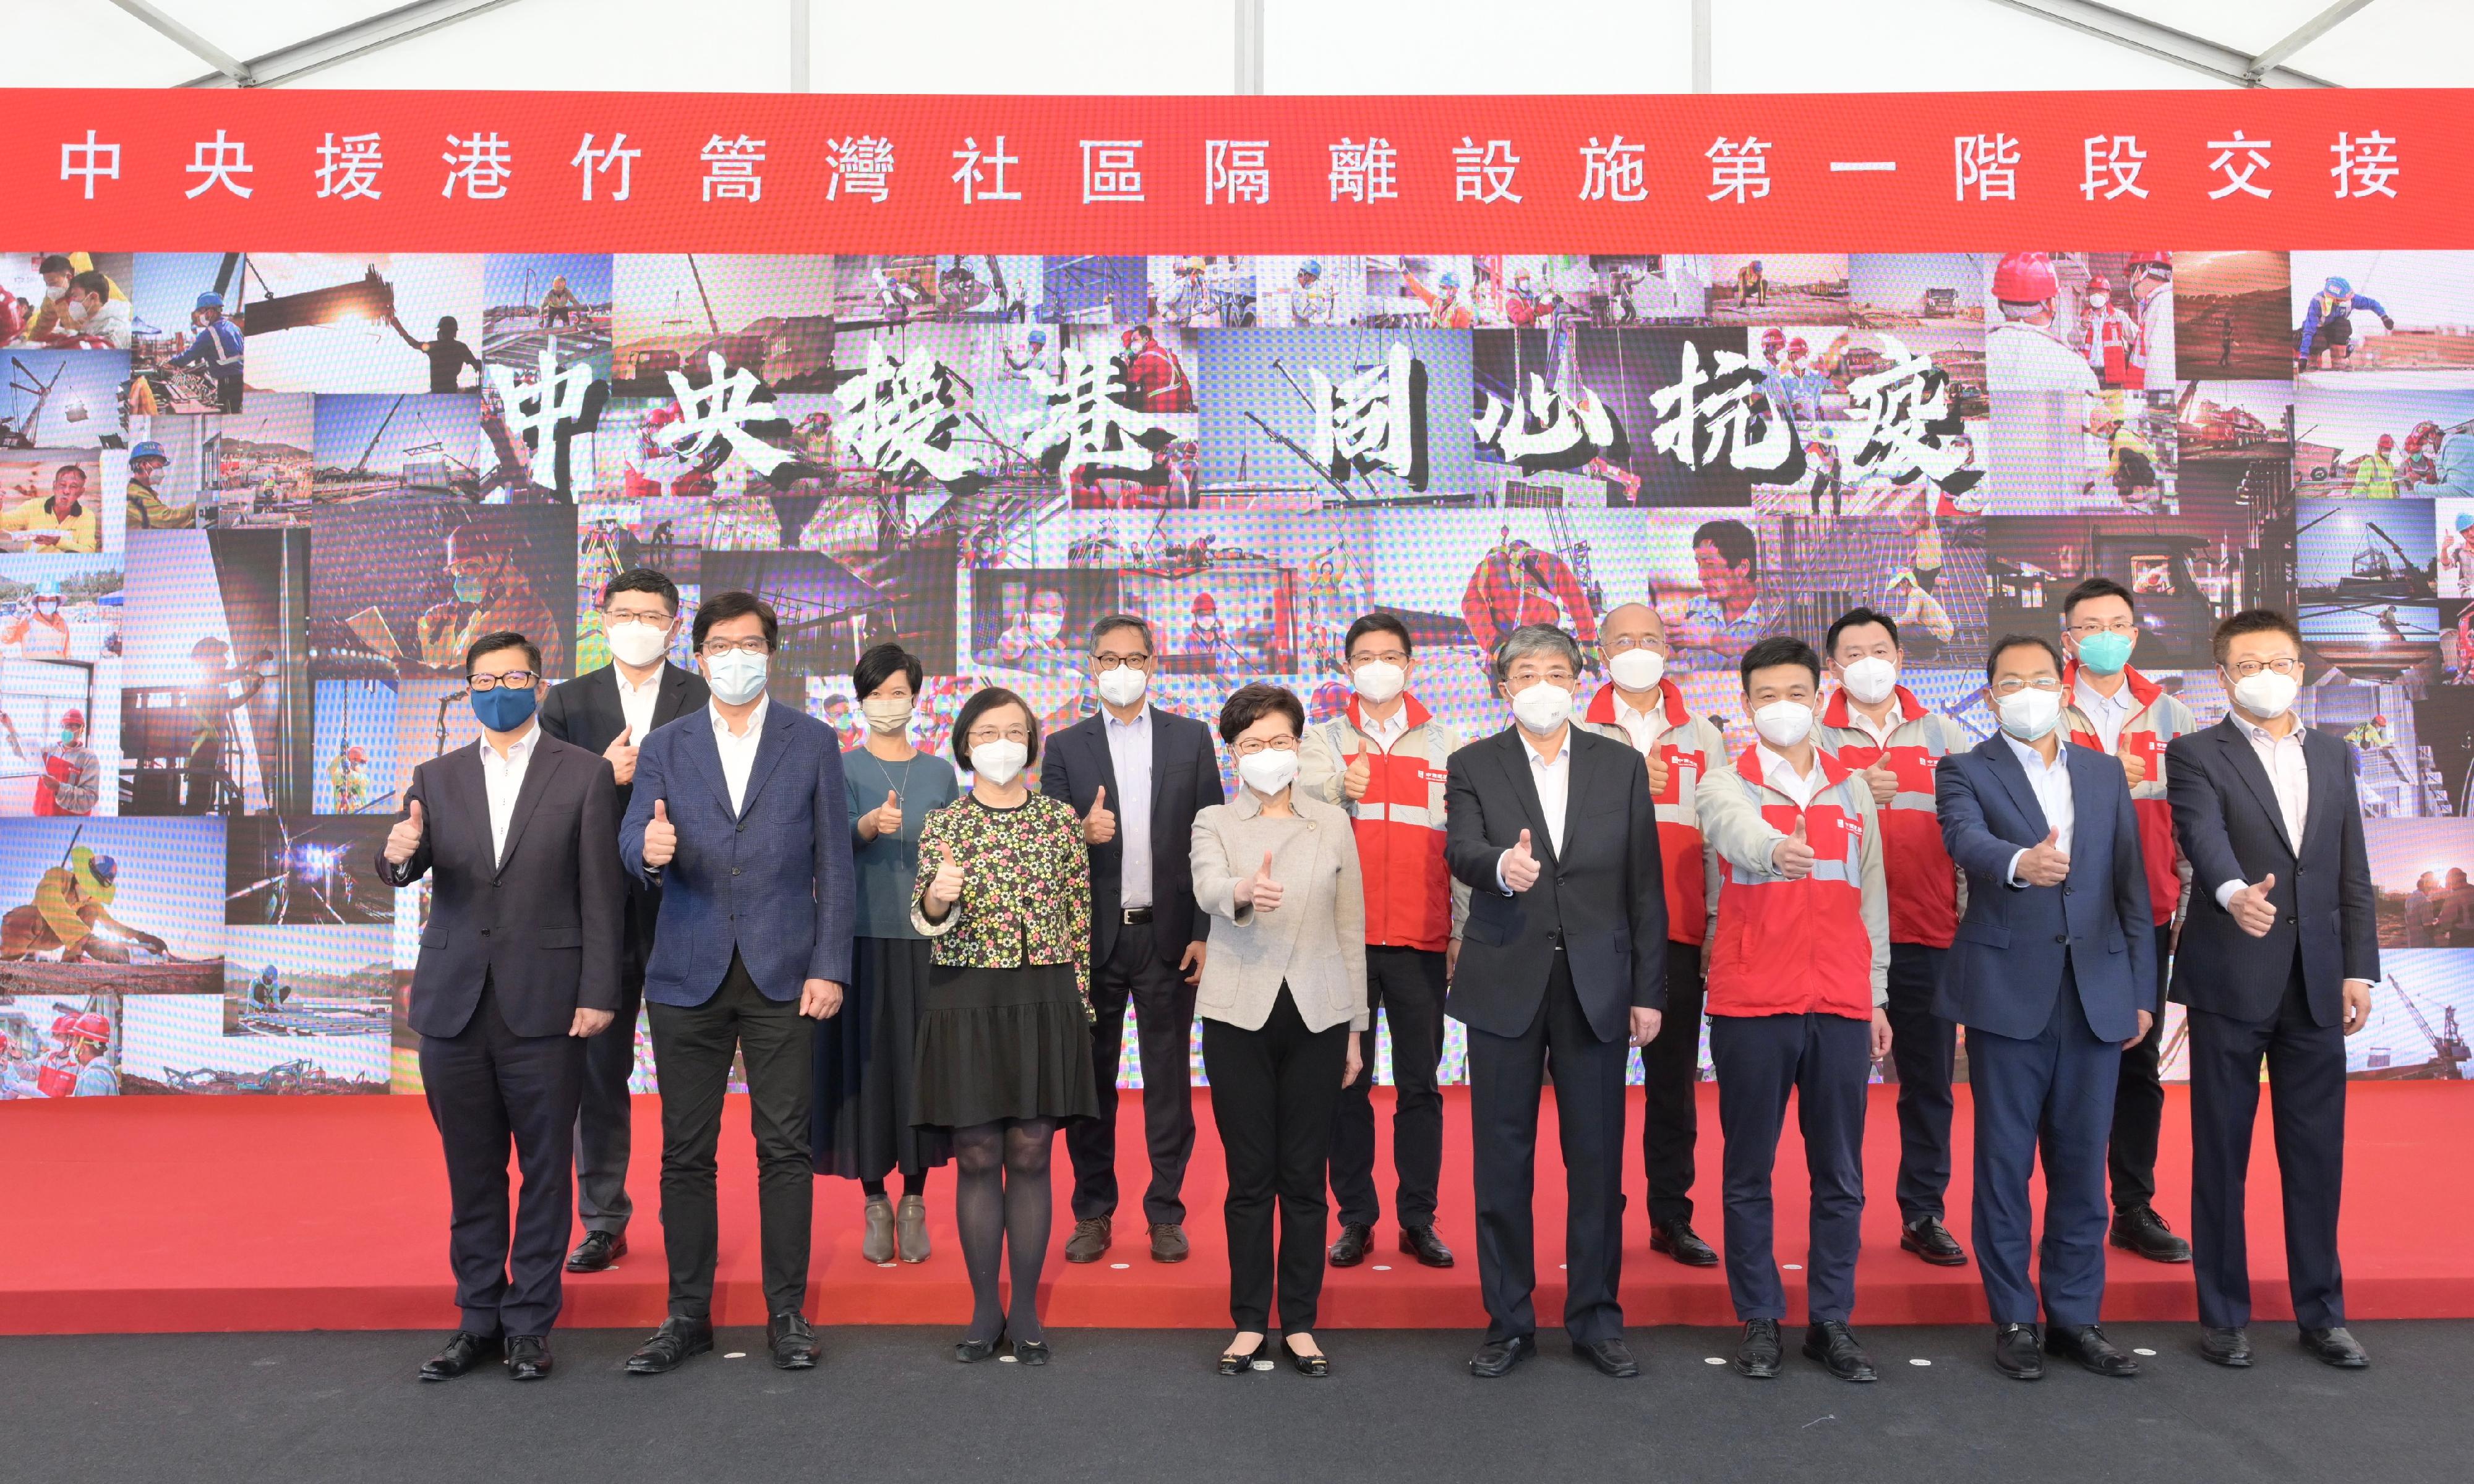 The Chief Executive, Mrs Carrie Lam, this afternoon (April 19) inspected the handover of the first phase of the Penny's Bay Community Isolation Facility constructed with Mainland support. Photo shows Mrs Lam (front row, fourth left); the Deputy Director of the Liaison Office of the Central People's Government in the Hong Kong Special Administrative Region, Mr Luo Yonggang (front row, fourth right); the Executive Director and Chief Executive Officer of the contractor, China State Construction International Holdings Limited, Mr Zhang Haipeng (front row, third right); the Secretary for Food and Health, Professor Sophia Chan (front row, third left); the Secretary for Development, Mr Michael Wong (front row, second left); the Secretary for Security, Mr Tang Ping-keung (front row, first left); the Permanent Secretary for Development (Works), Mr Ricky Lau (back row, third left); the Director of Architectural Services, Ms Winnie Ho (back row, second left); the Chief Executive of the Hospital Authority, Dr Tony Ko (back row, first left), and other guests at the event.
